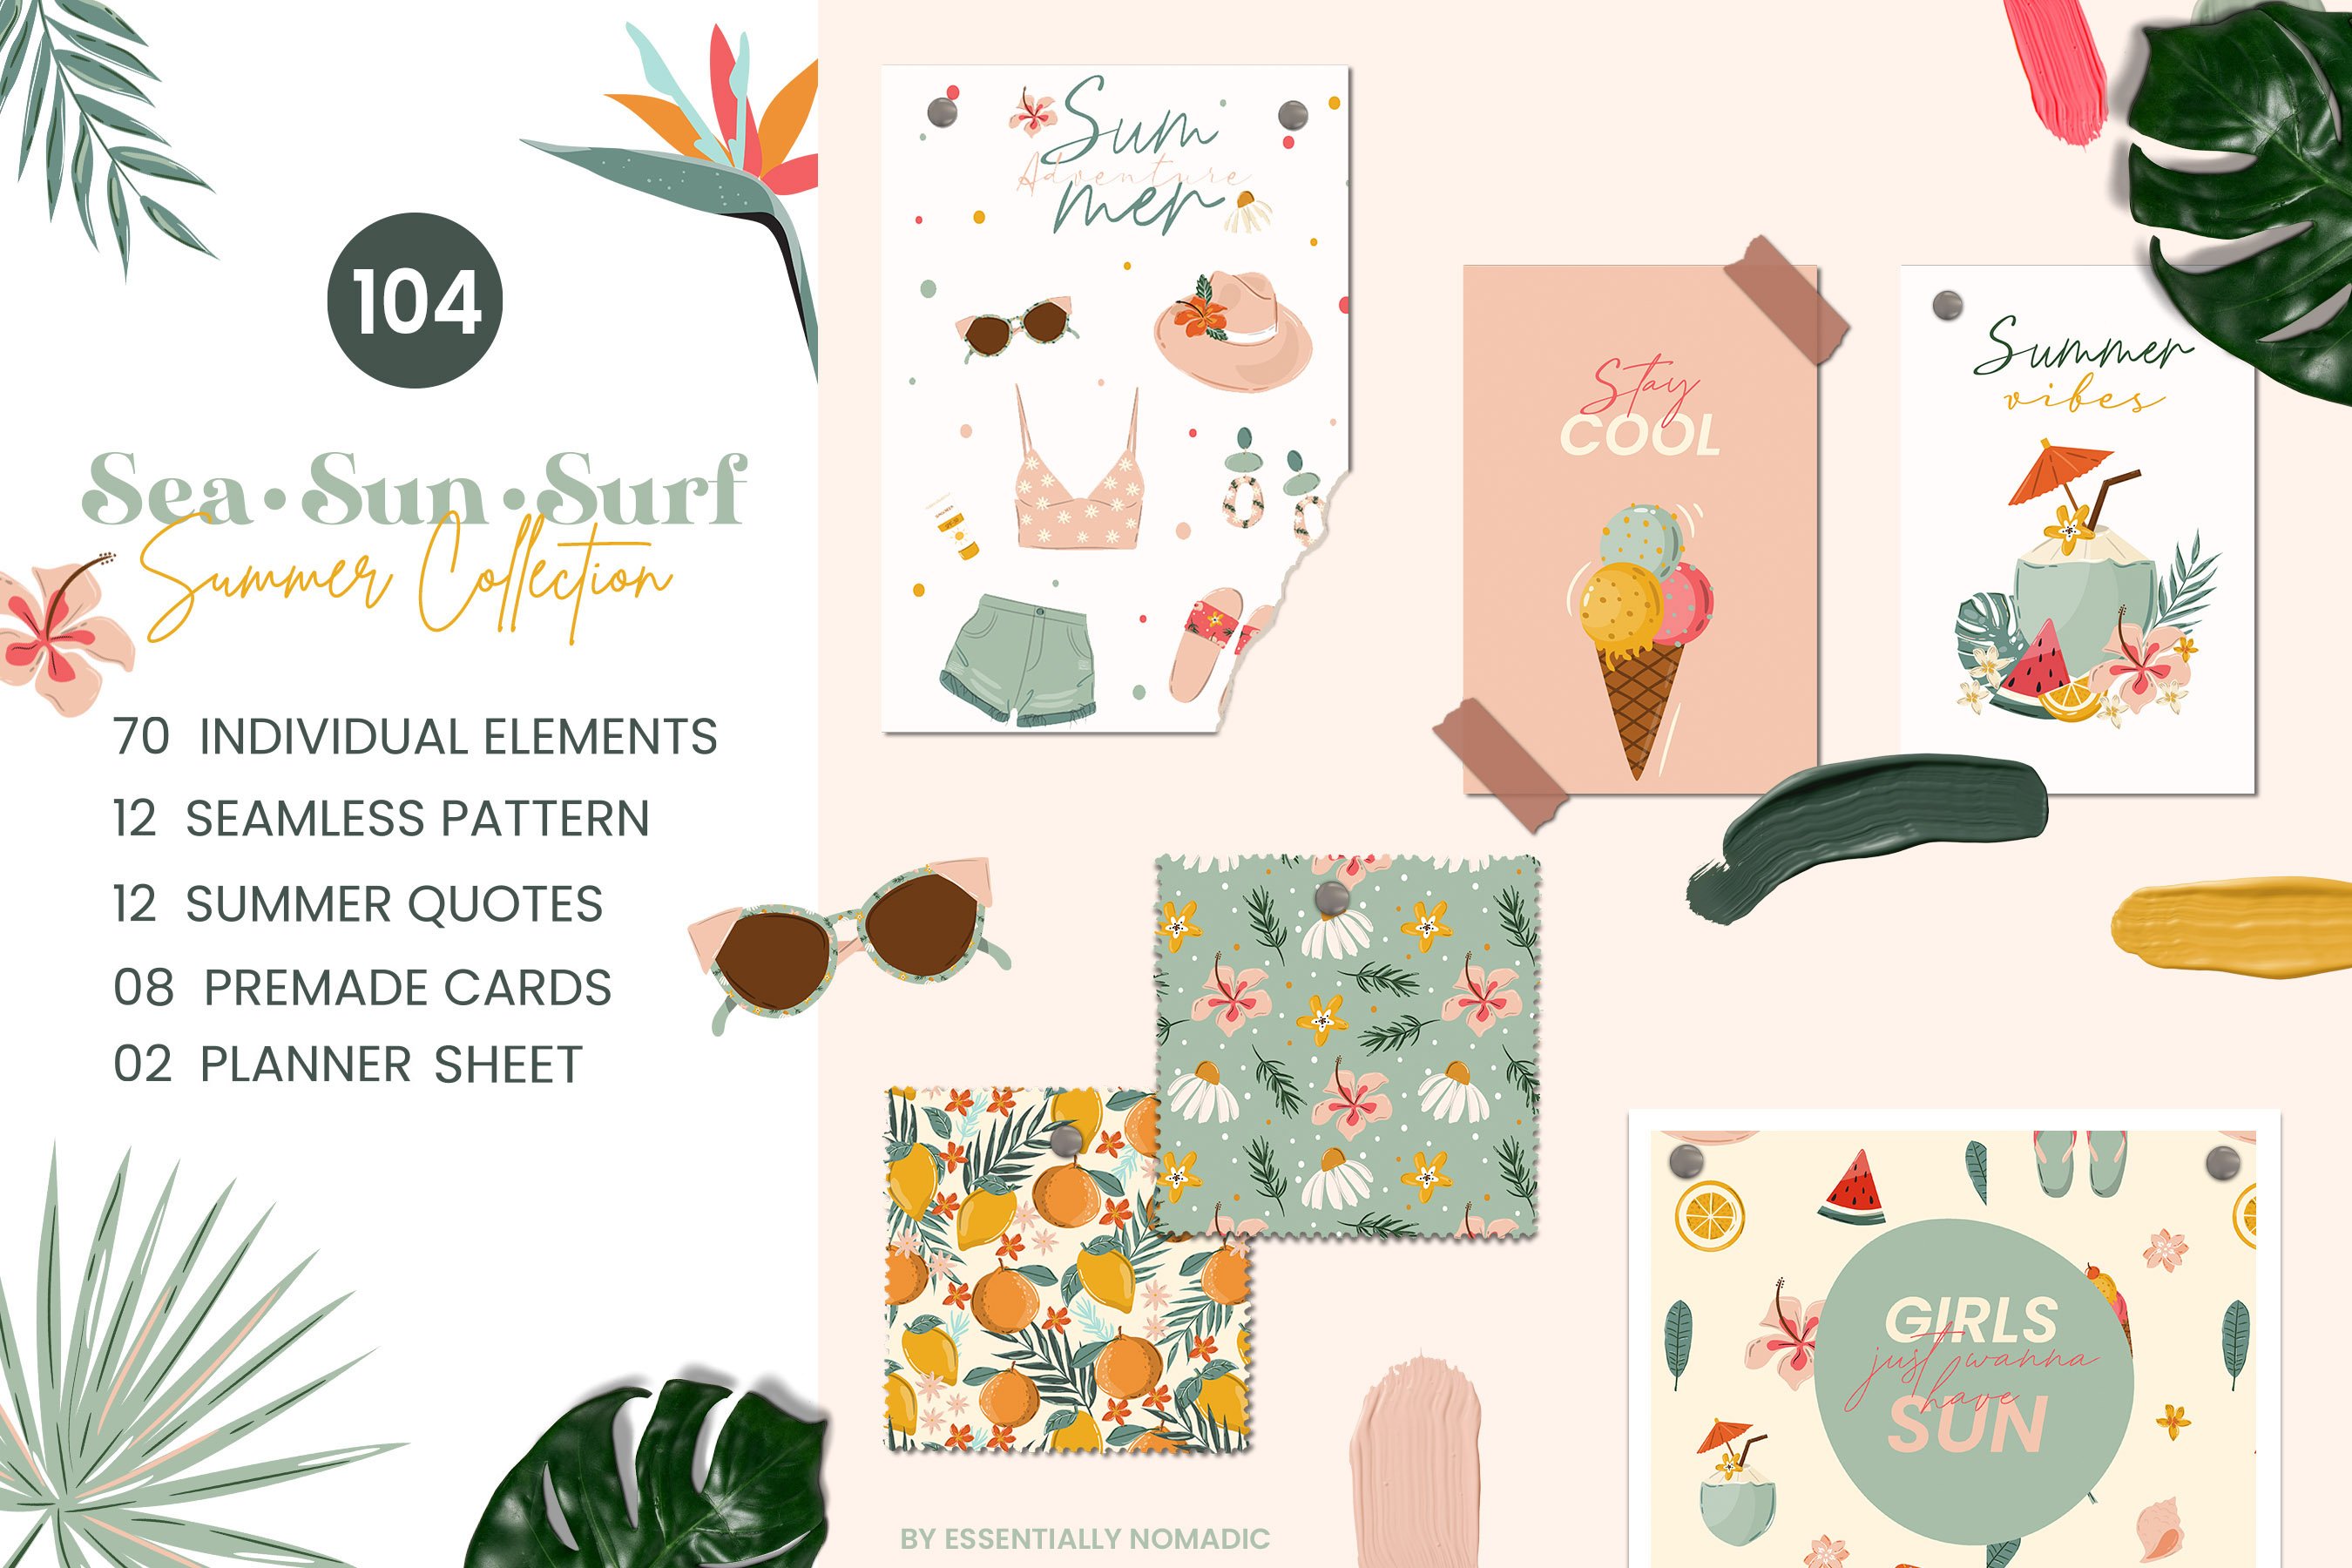 Pastel cards with beach illustrations.